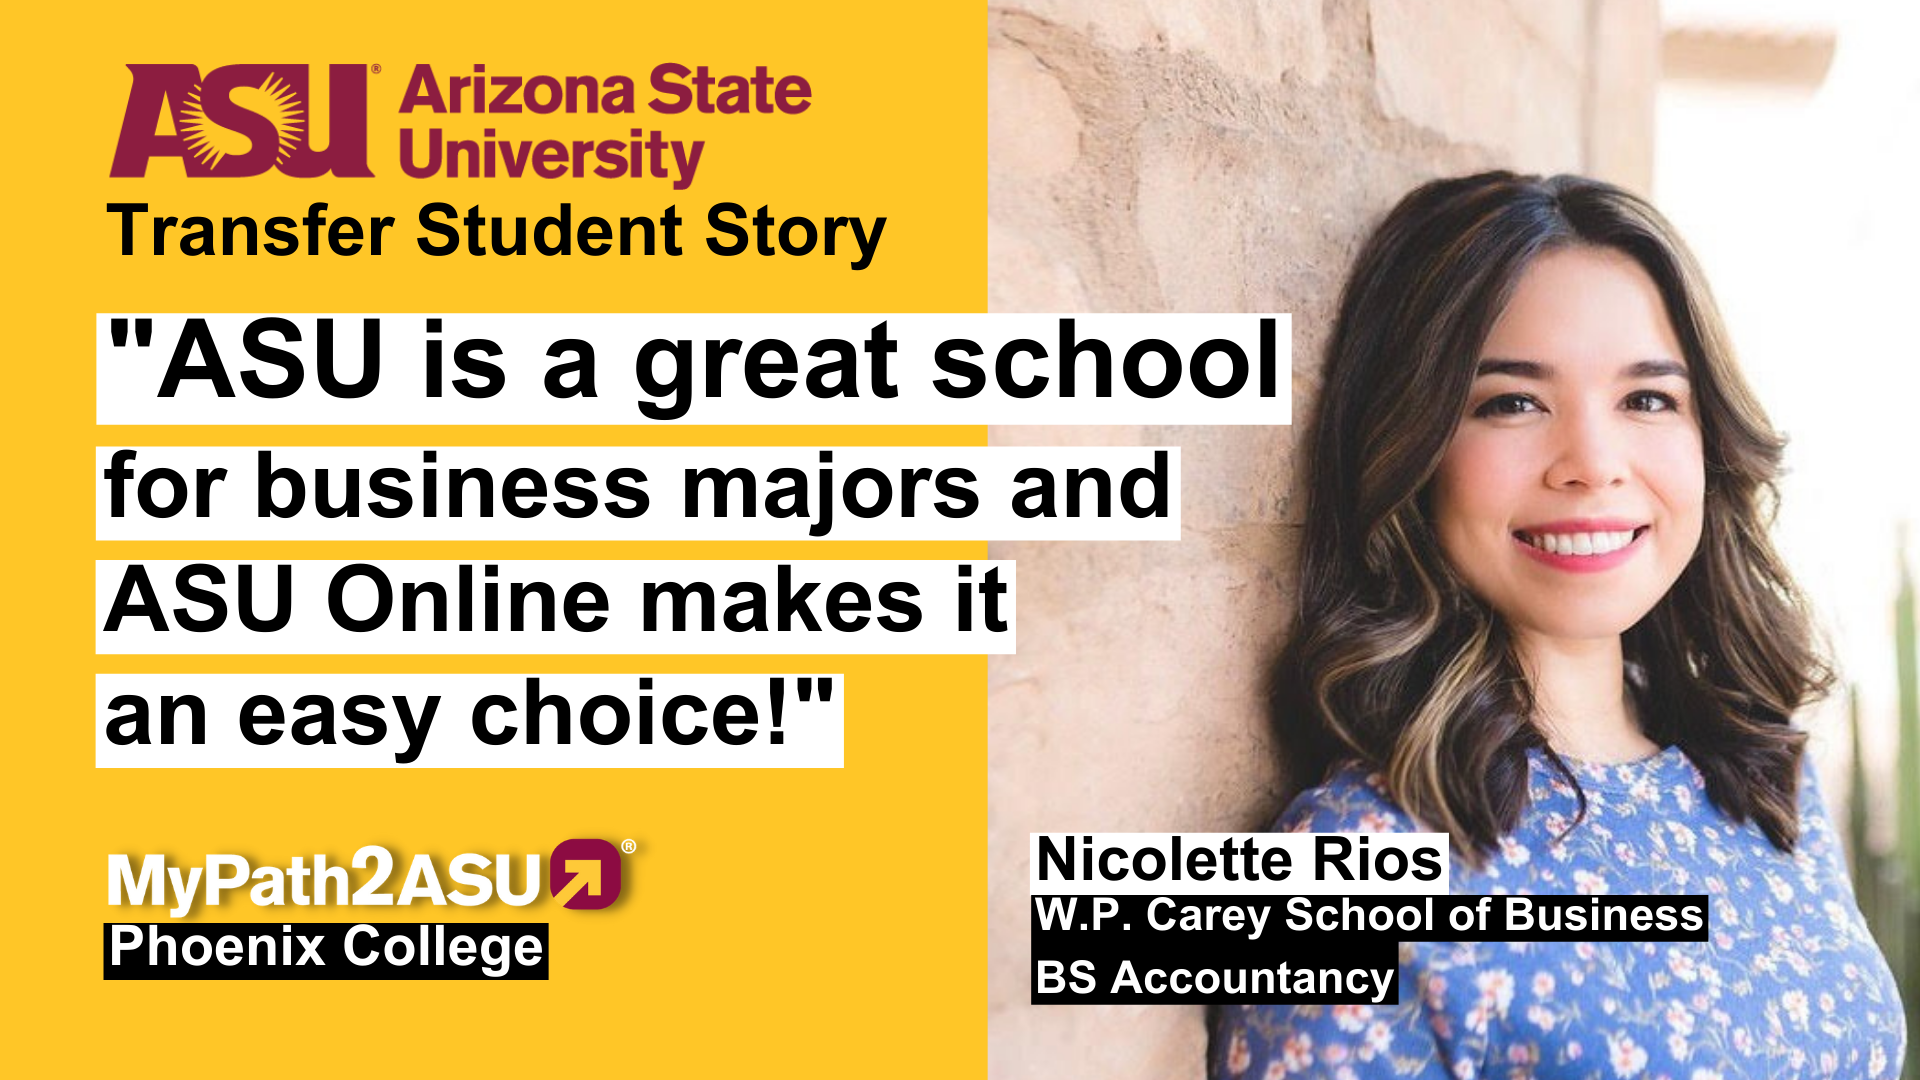 Nicolette Transfer Story Graphic w/ quote: "ASU is a great school for business majors and ASU Online makes it an easy choice!"